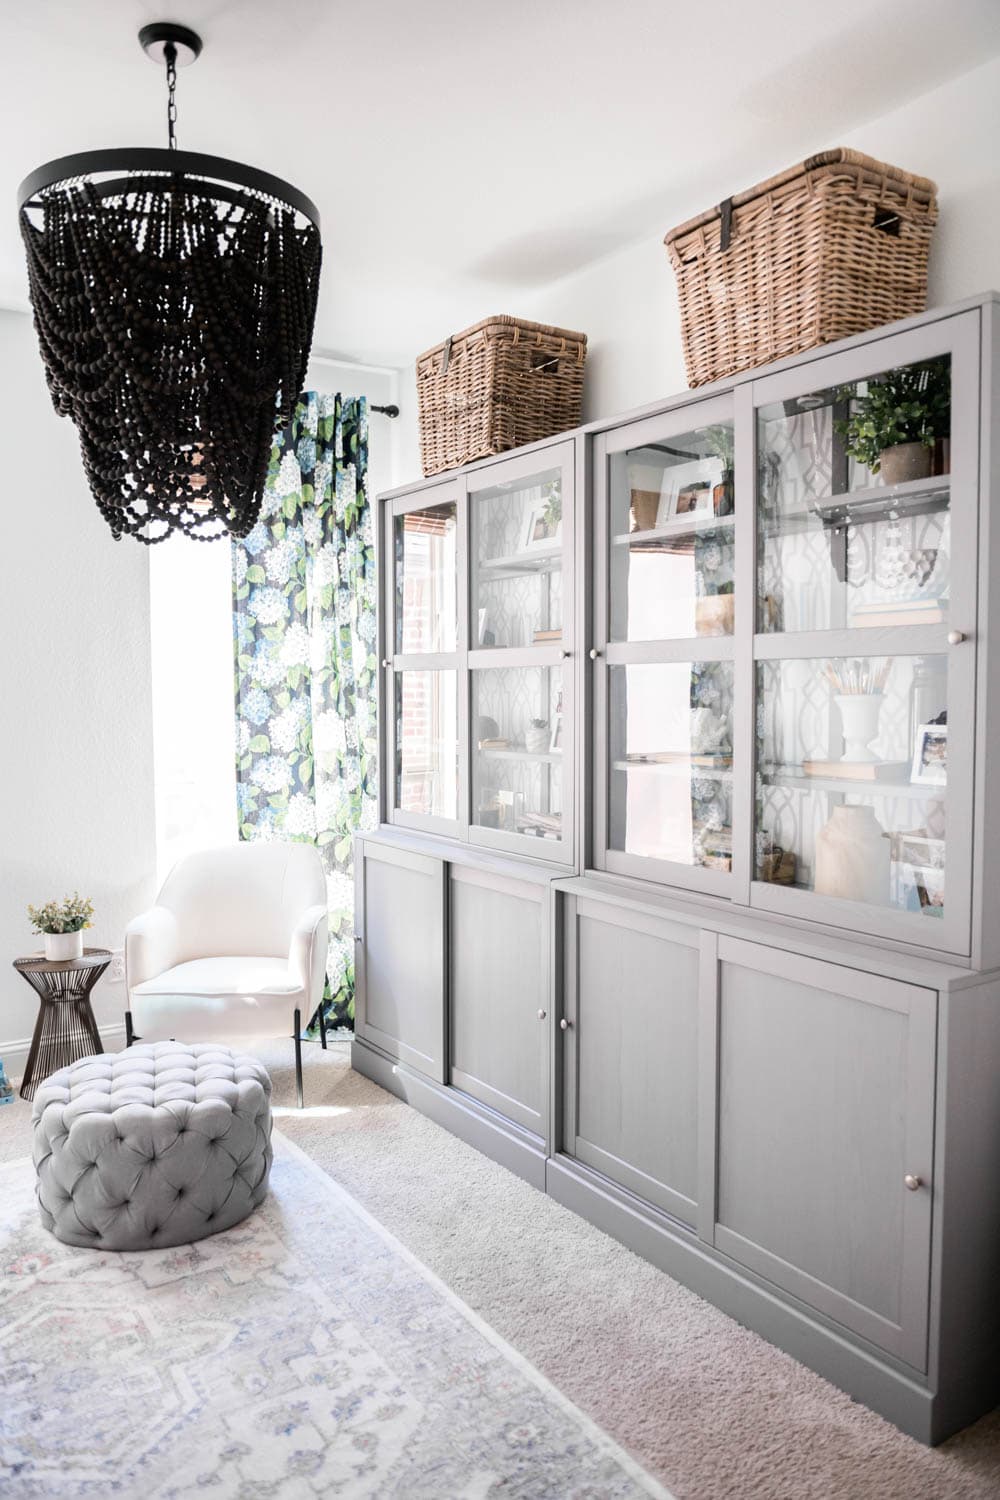 Grey cabinets from Ikea in a small home office. Add wicker baskets to top of cabinets